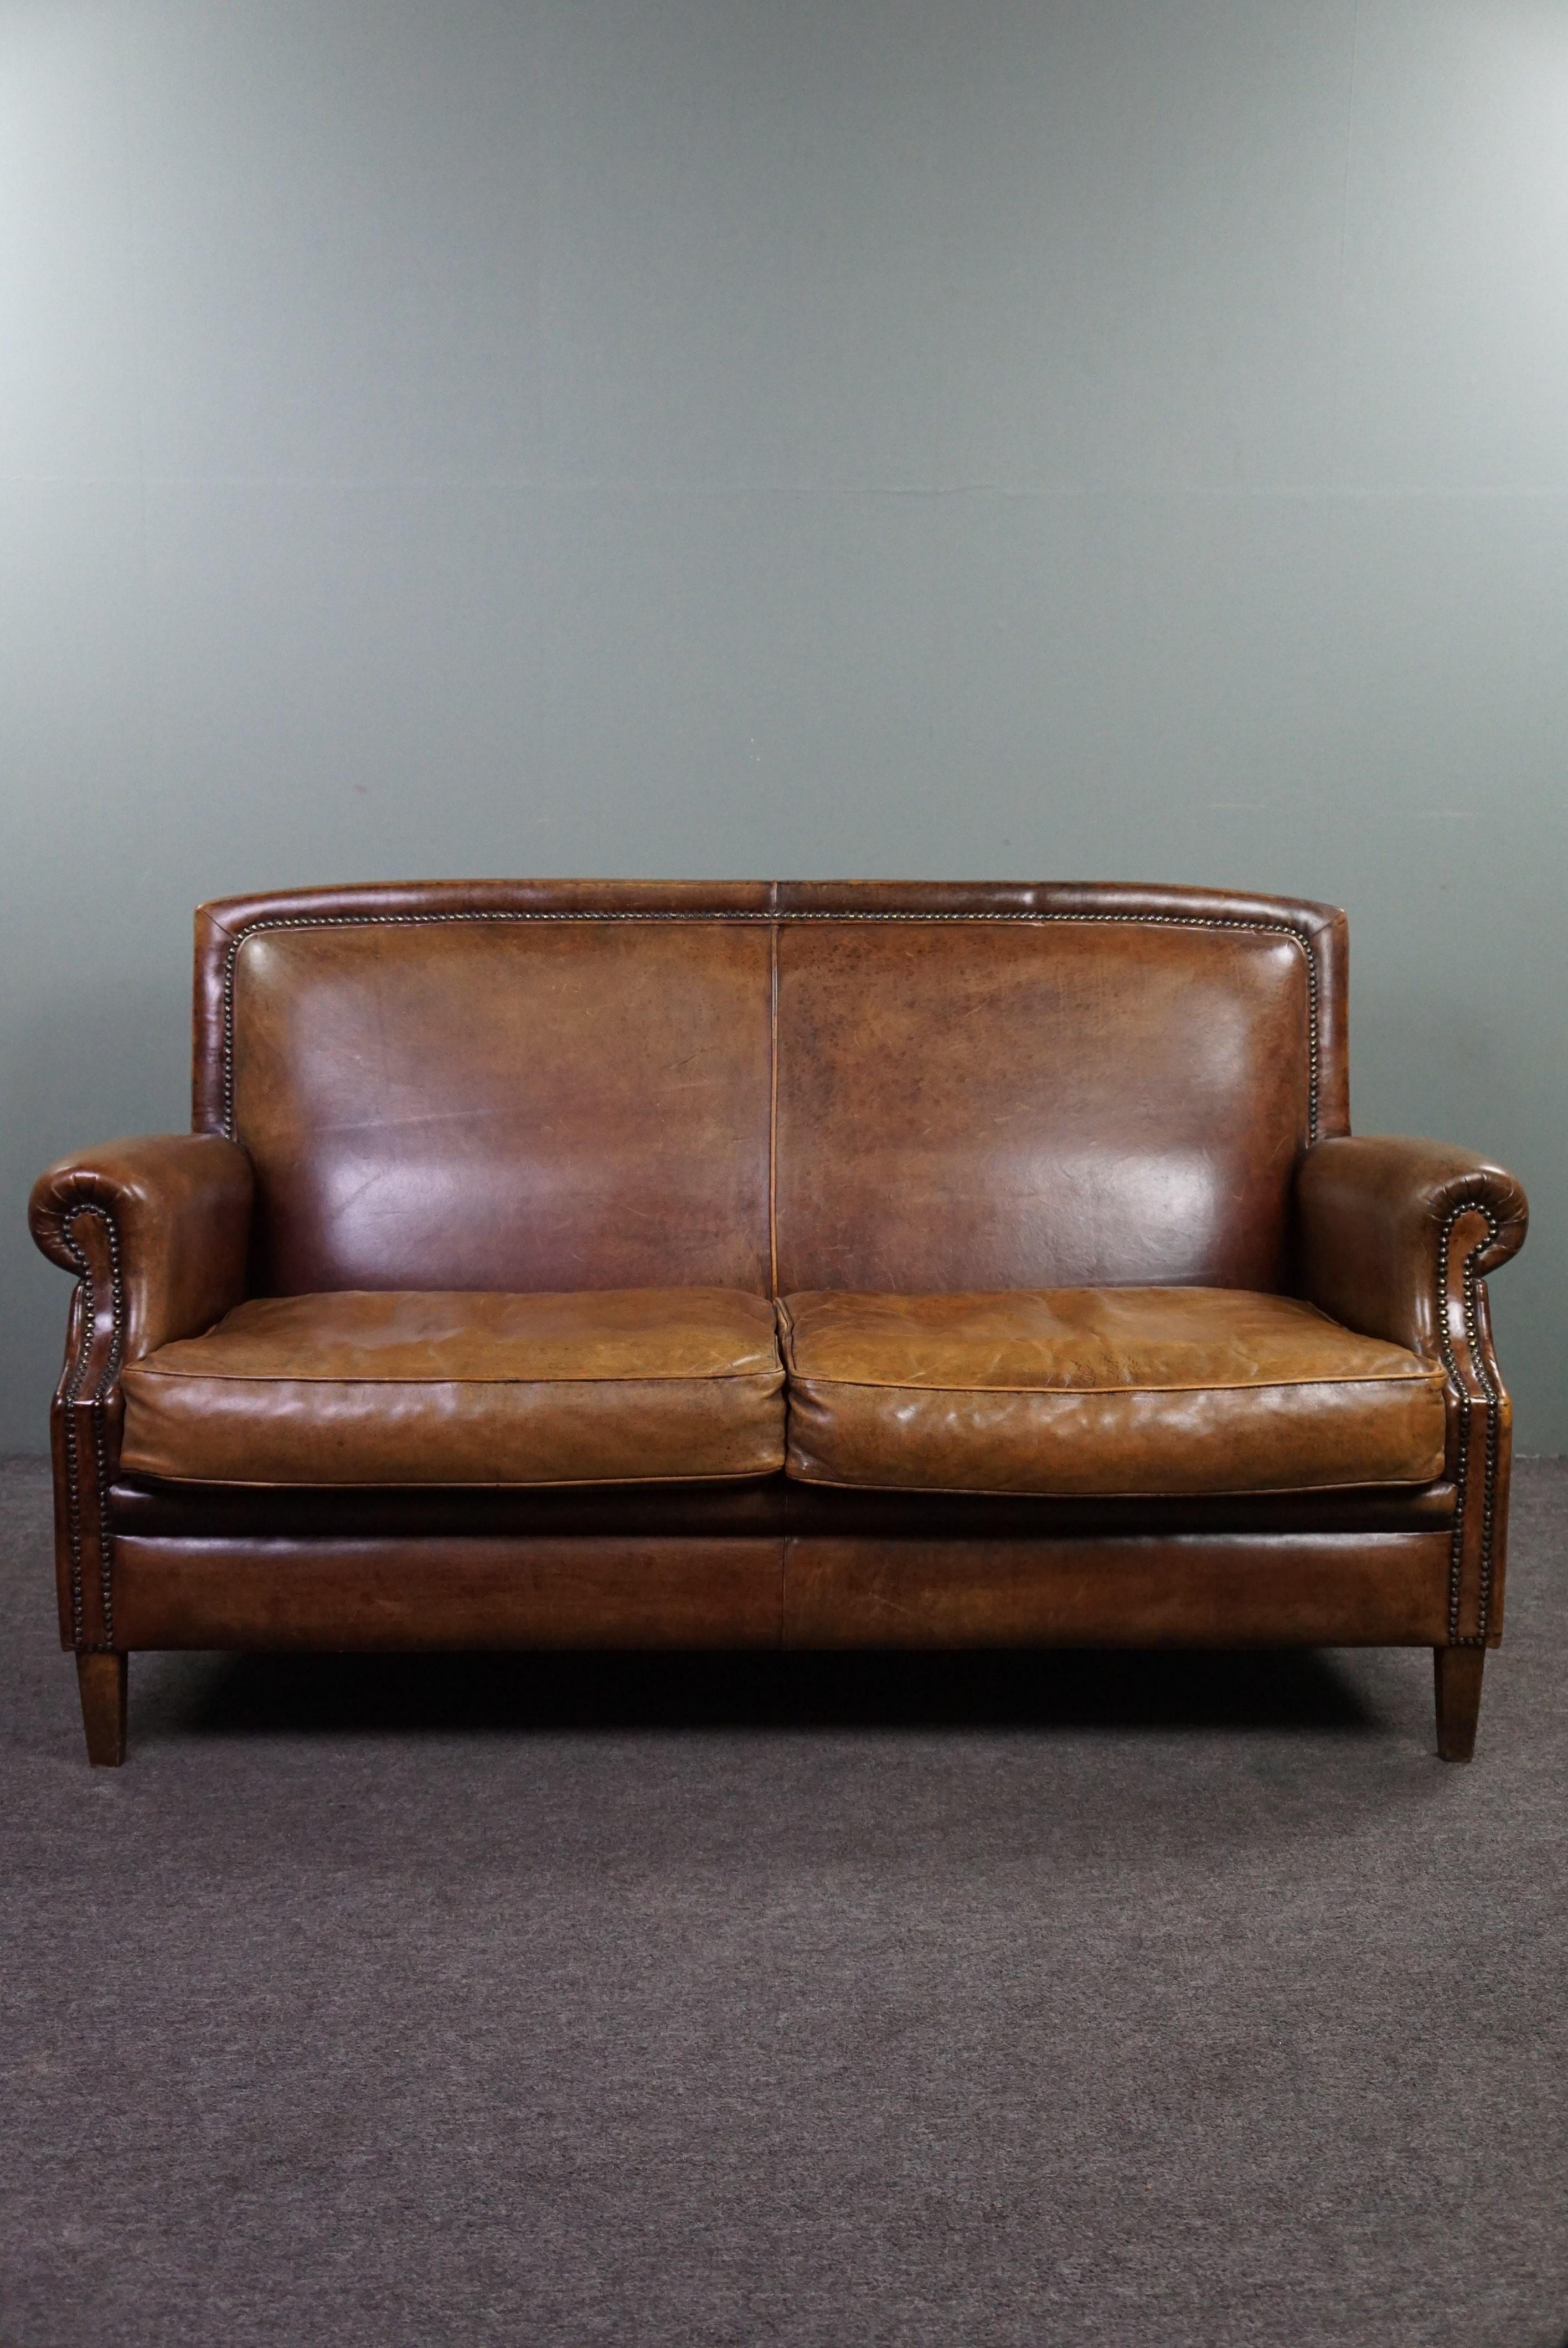 Offered is this well-fitting sheepskin leather 2-seater sofa. This beautiful sheepskin leather sofa is exquisite in color, form, and size, providing excellent comfort and a premium look and feel. With its rich and vibrant colors, lovely panel